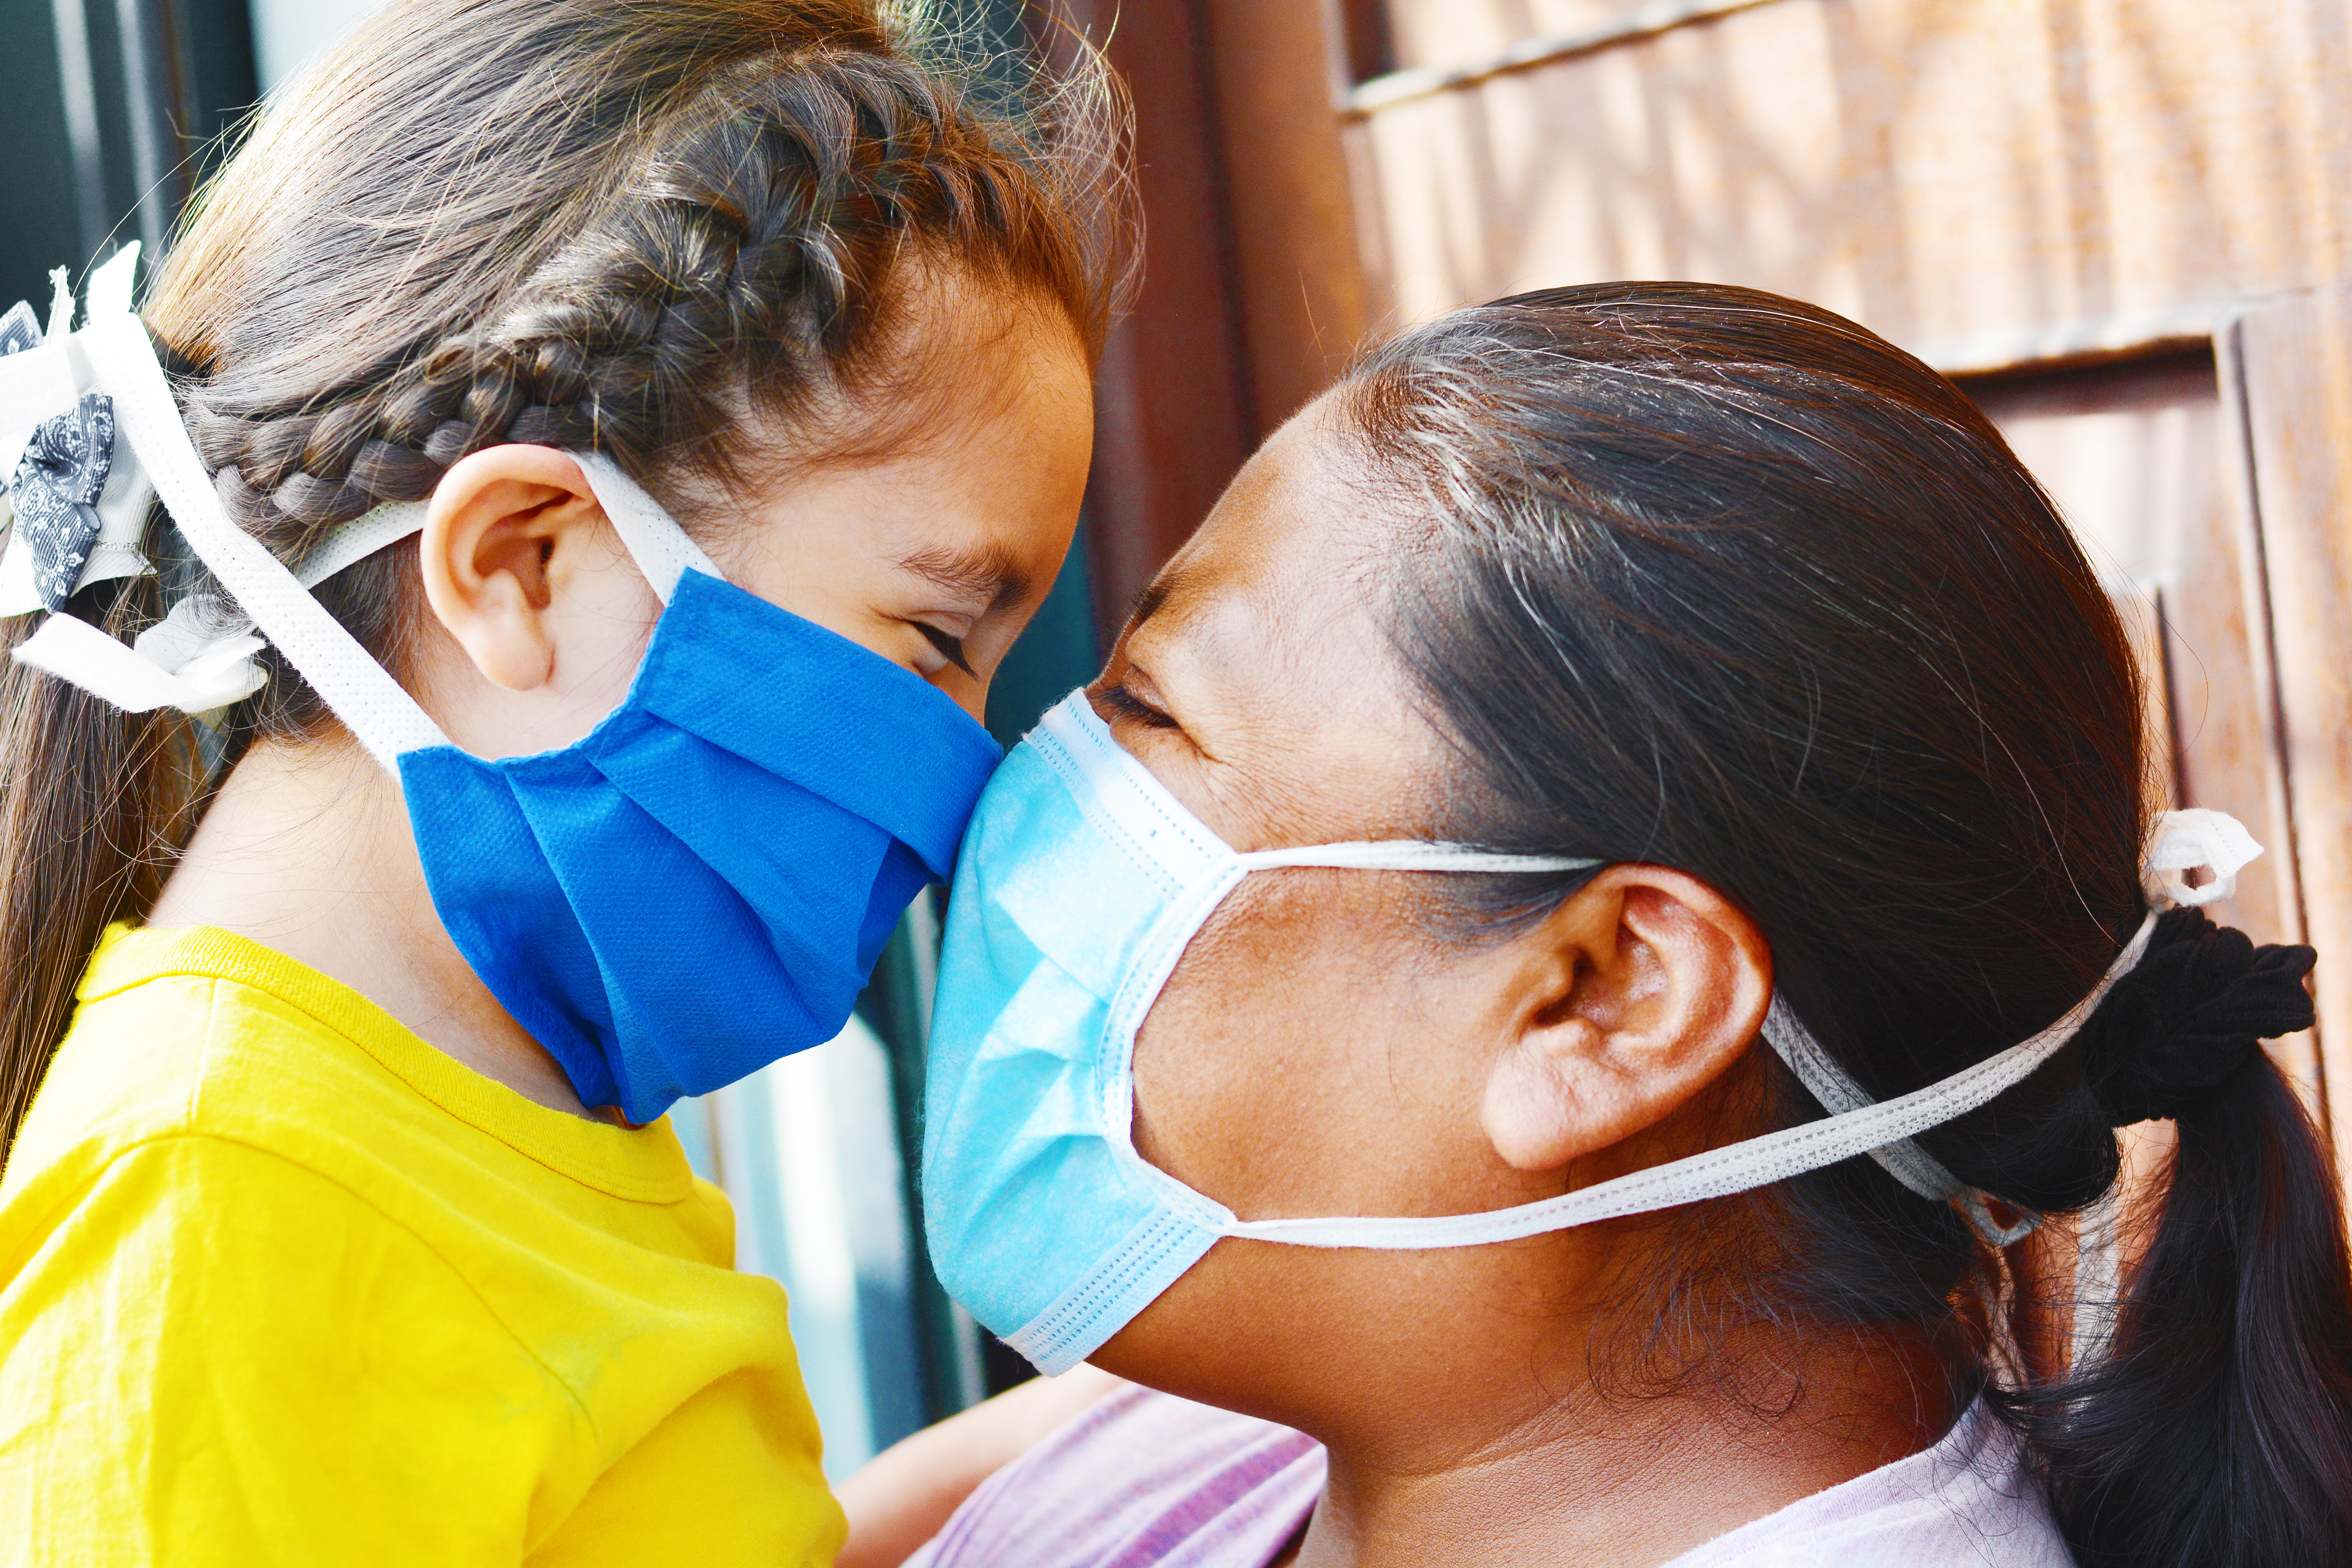 Native American woman and young girl, both wearing surgical masks, embrace and touch noses, smiling.